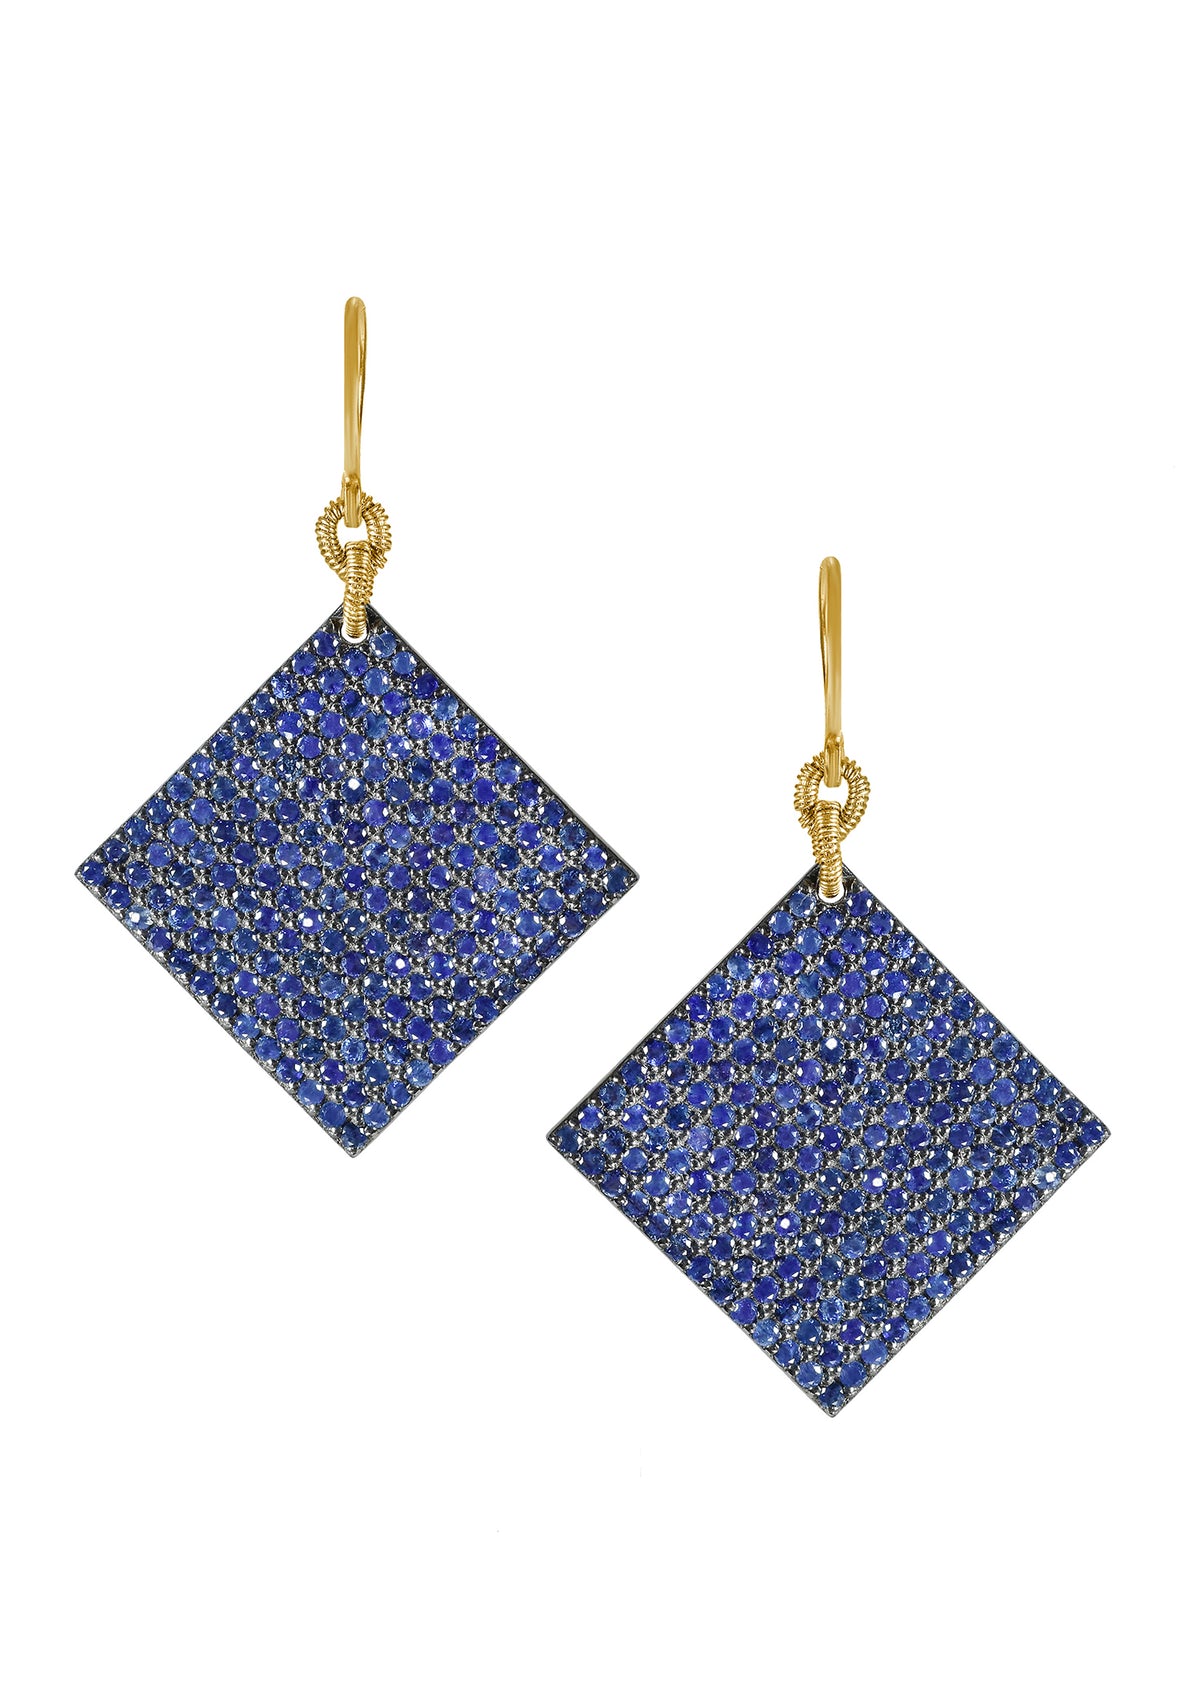 Blue sapphire 14k gold Sterling silver Mixed metal Special order only Earrings measure 1-1/2&quot; in length (including the ear wires) and 1 1/8&quot; in width Handmade in our Los Angeles studio